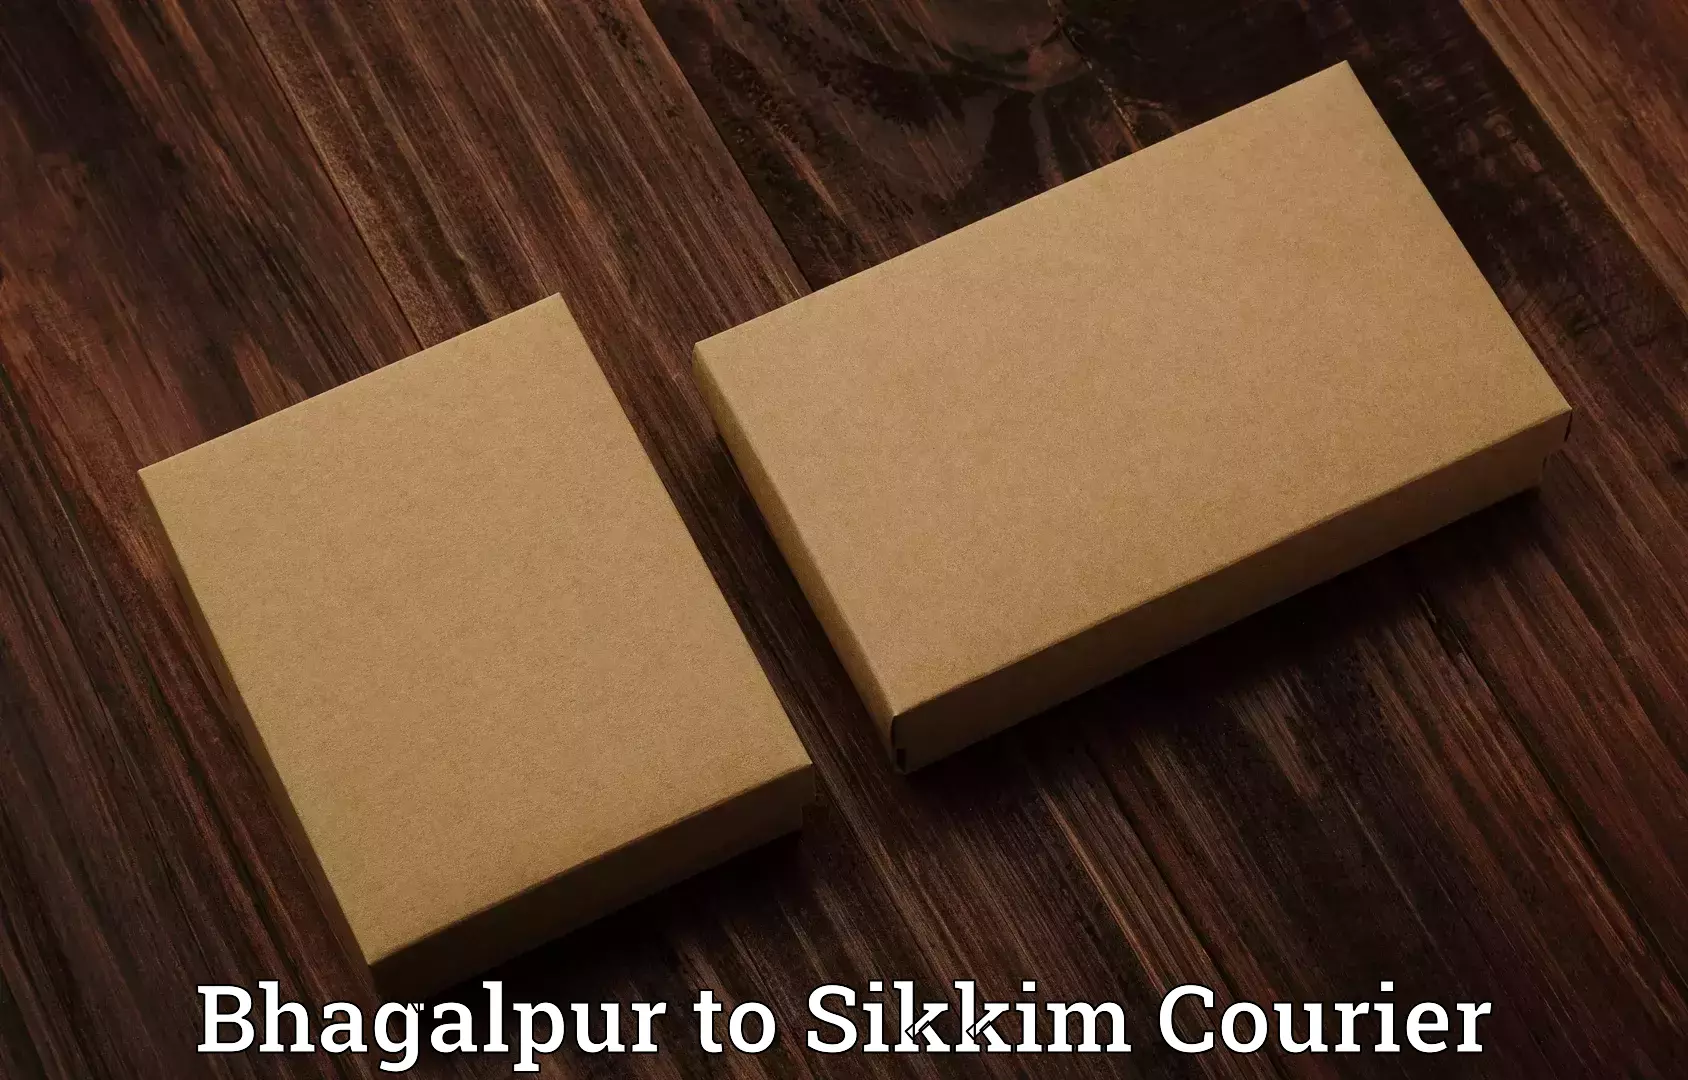 Luggage delivery app Bhagalpur to Sikkim